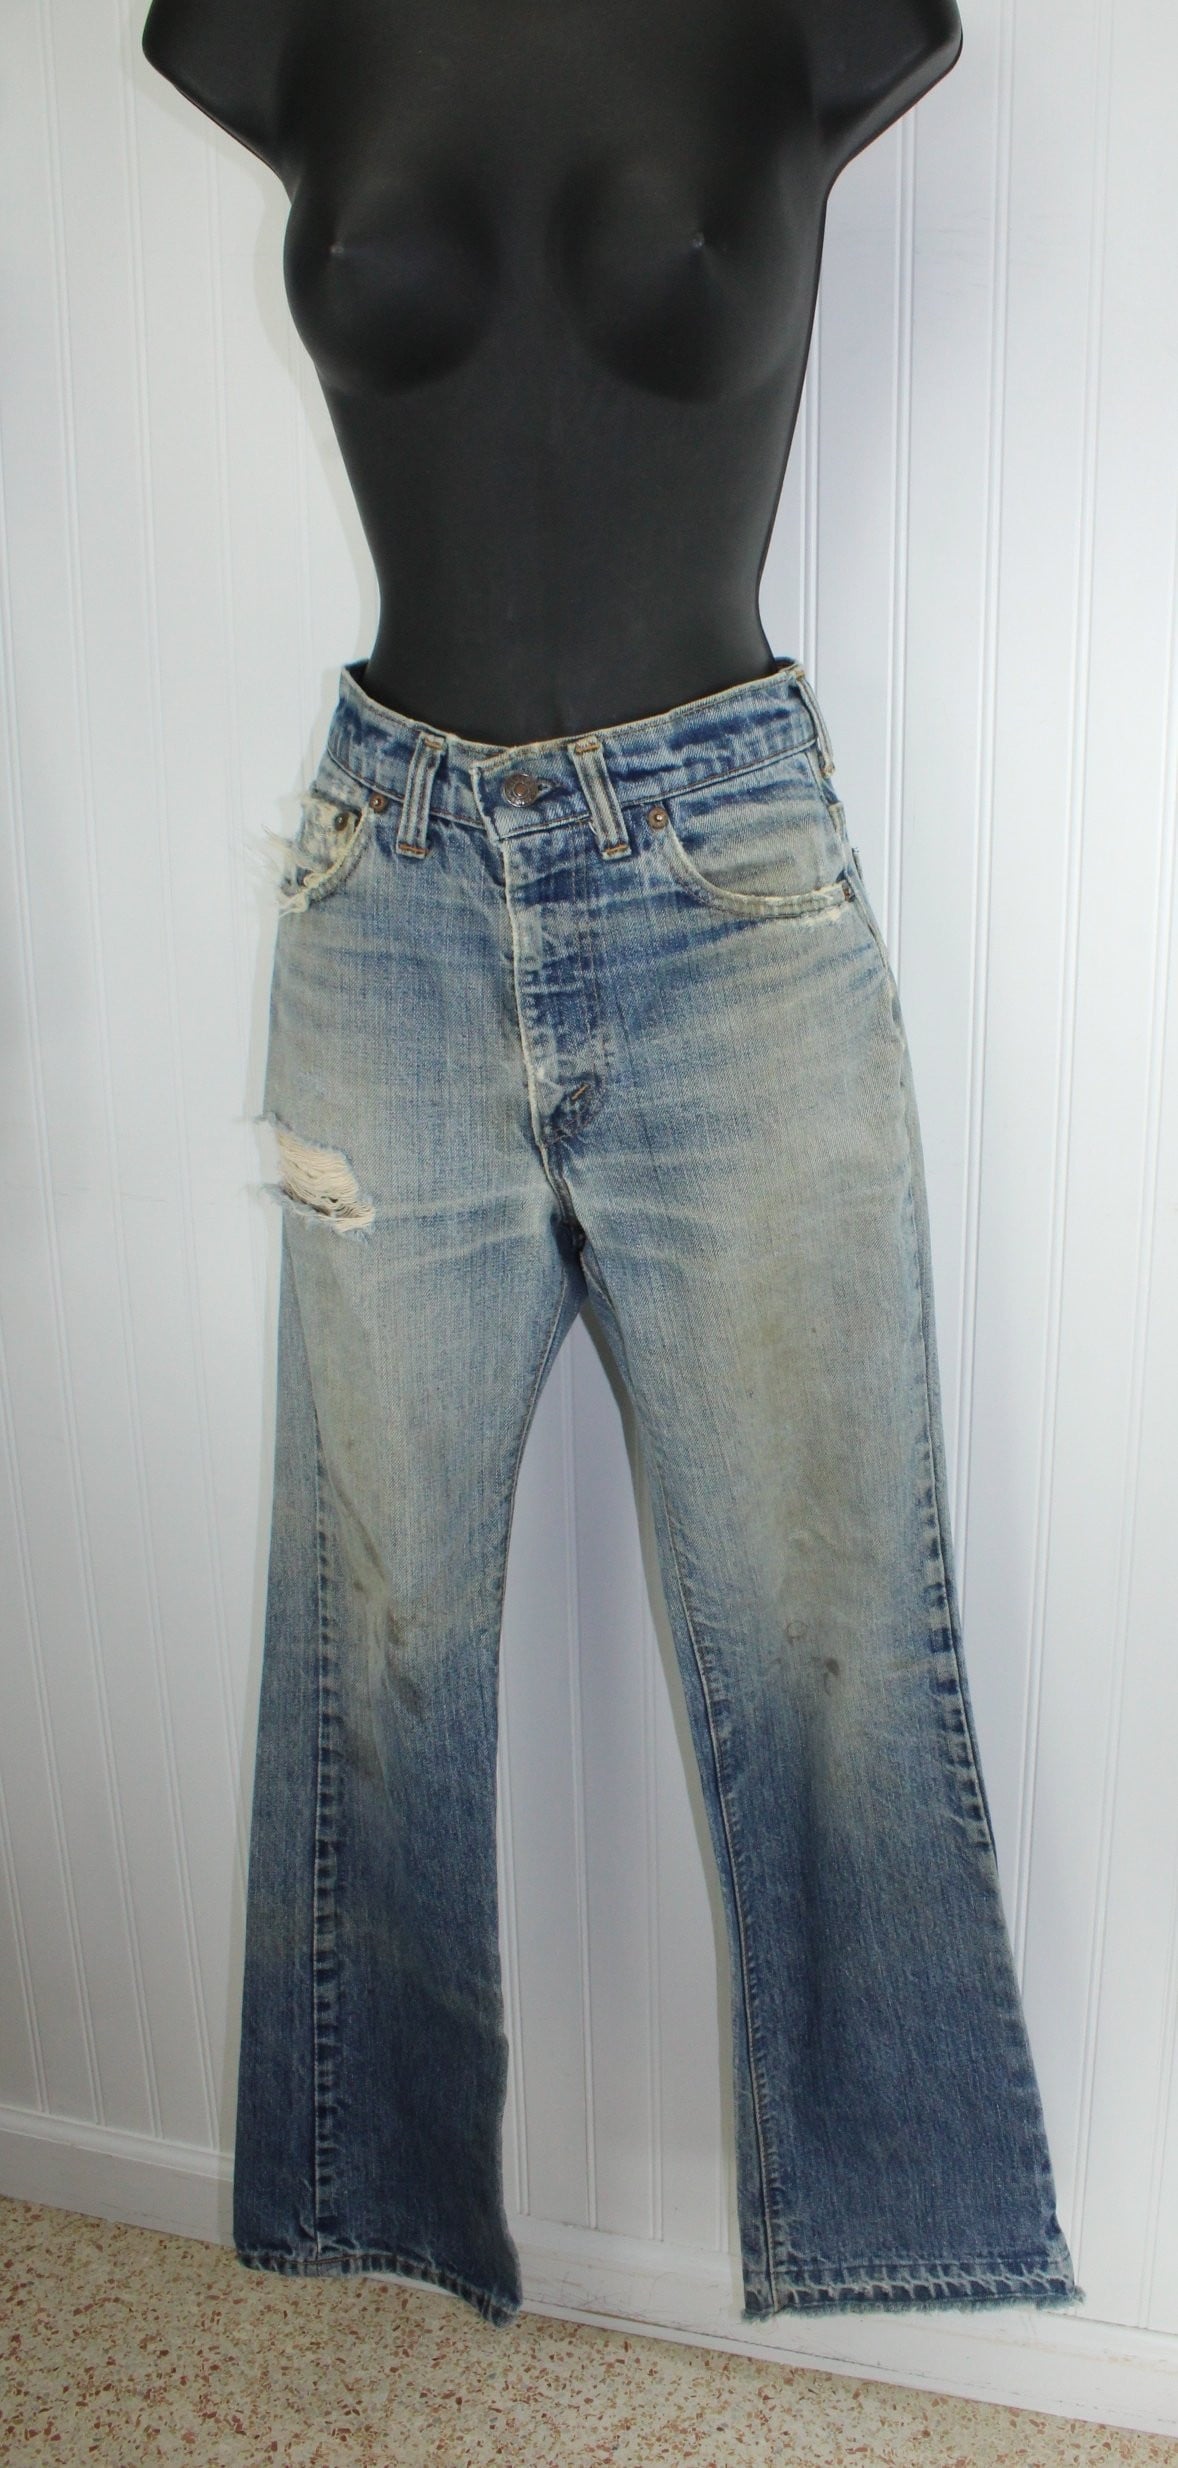 Vintage Levi's Skate Boarder Distressed Grunge  Jeans - Early 1990s - Waist 29" Red Tab all gender